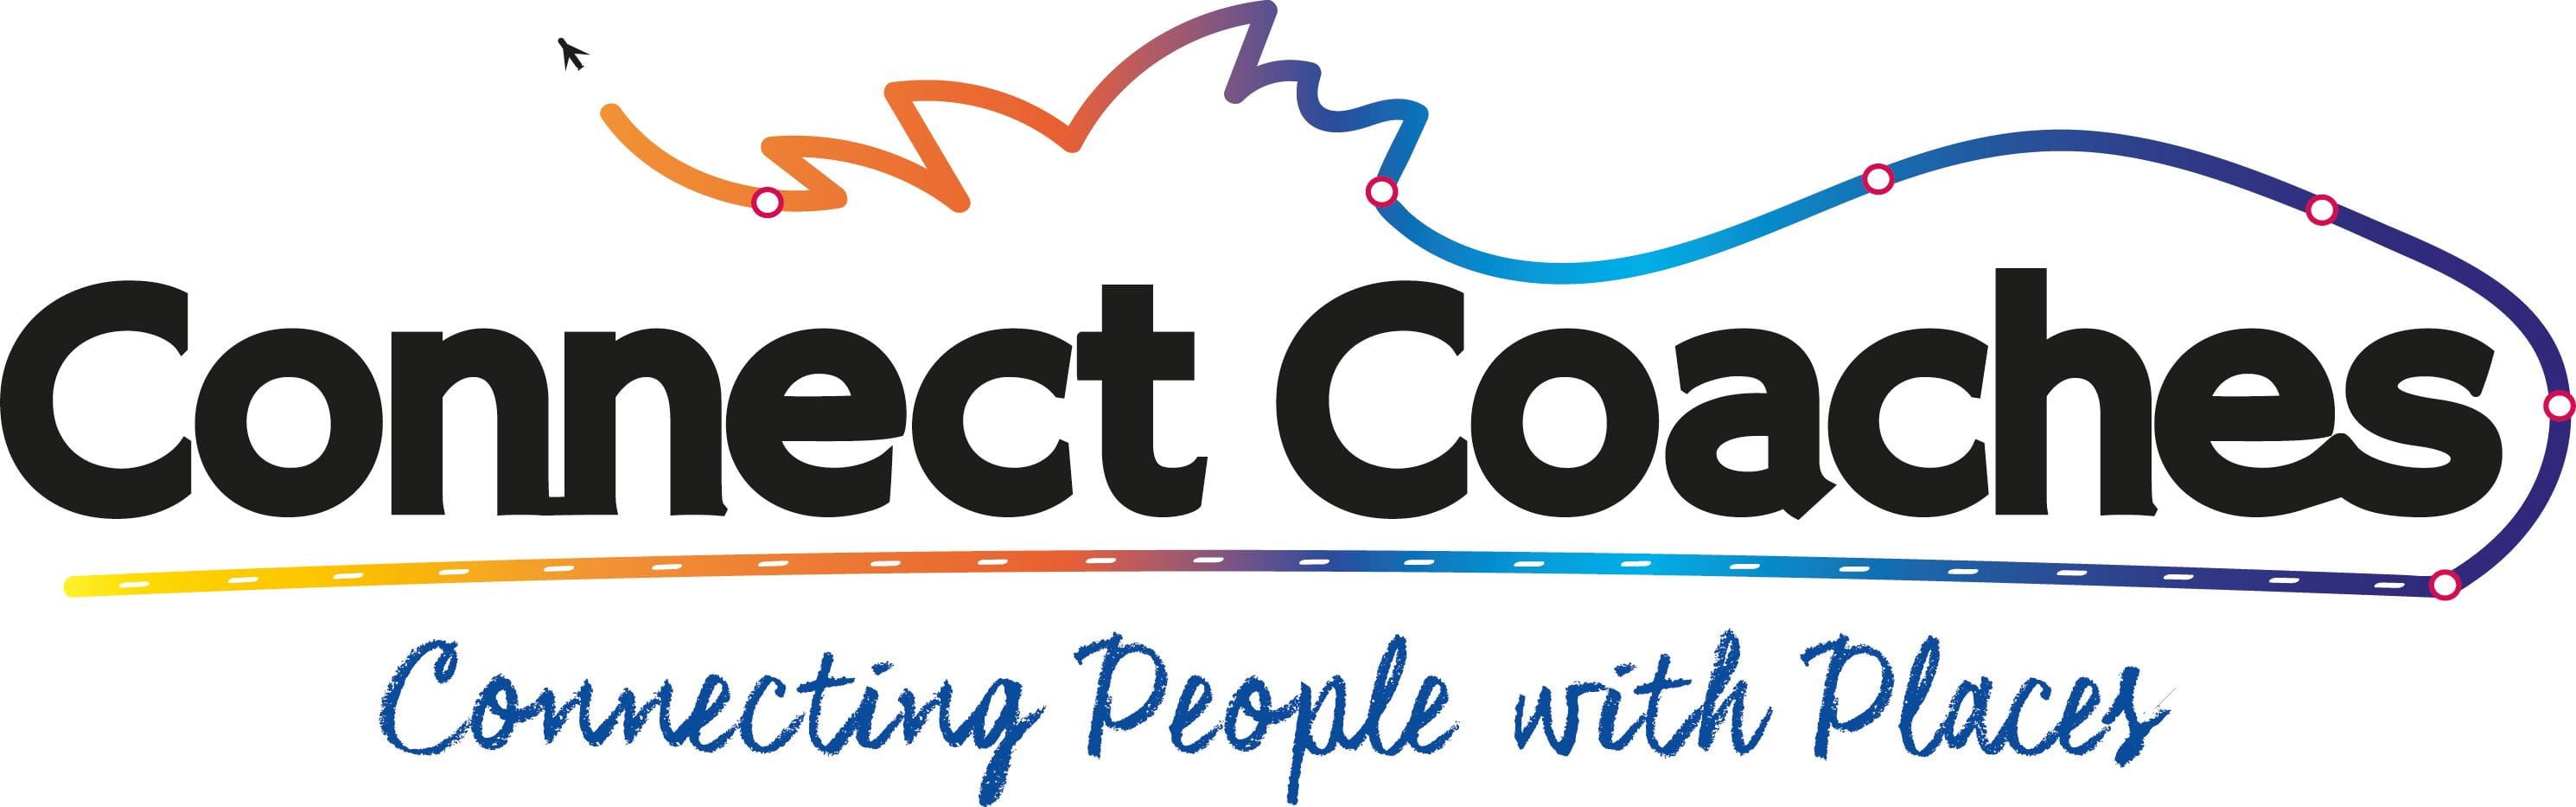 Connect Coaches . Connecting People with Places